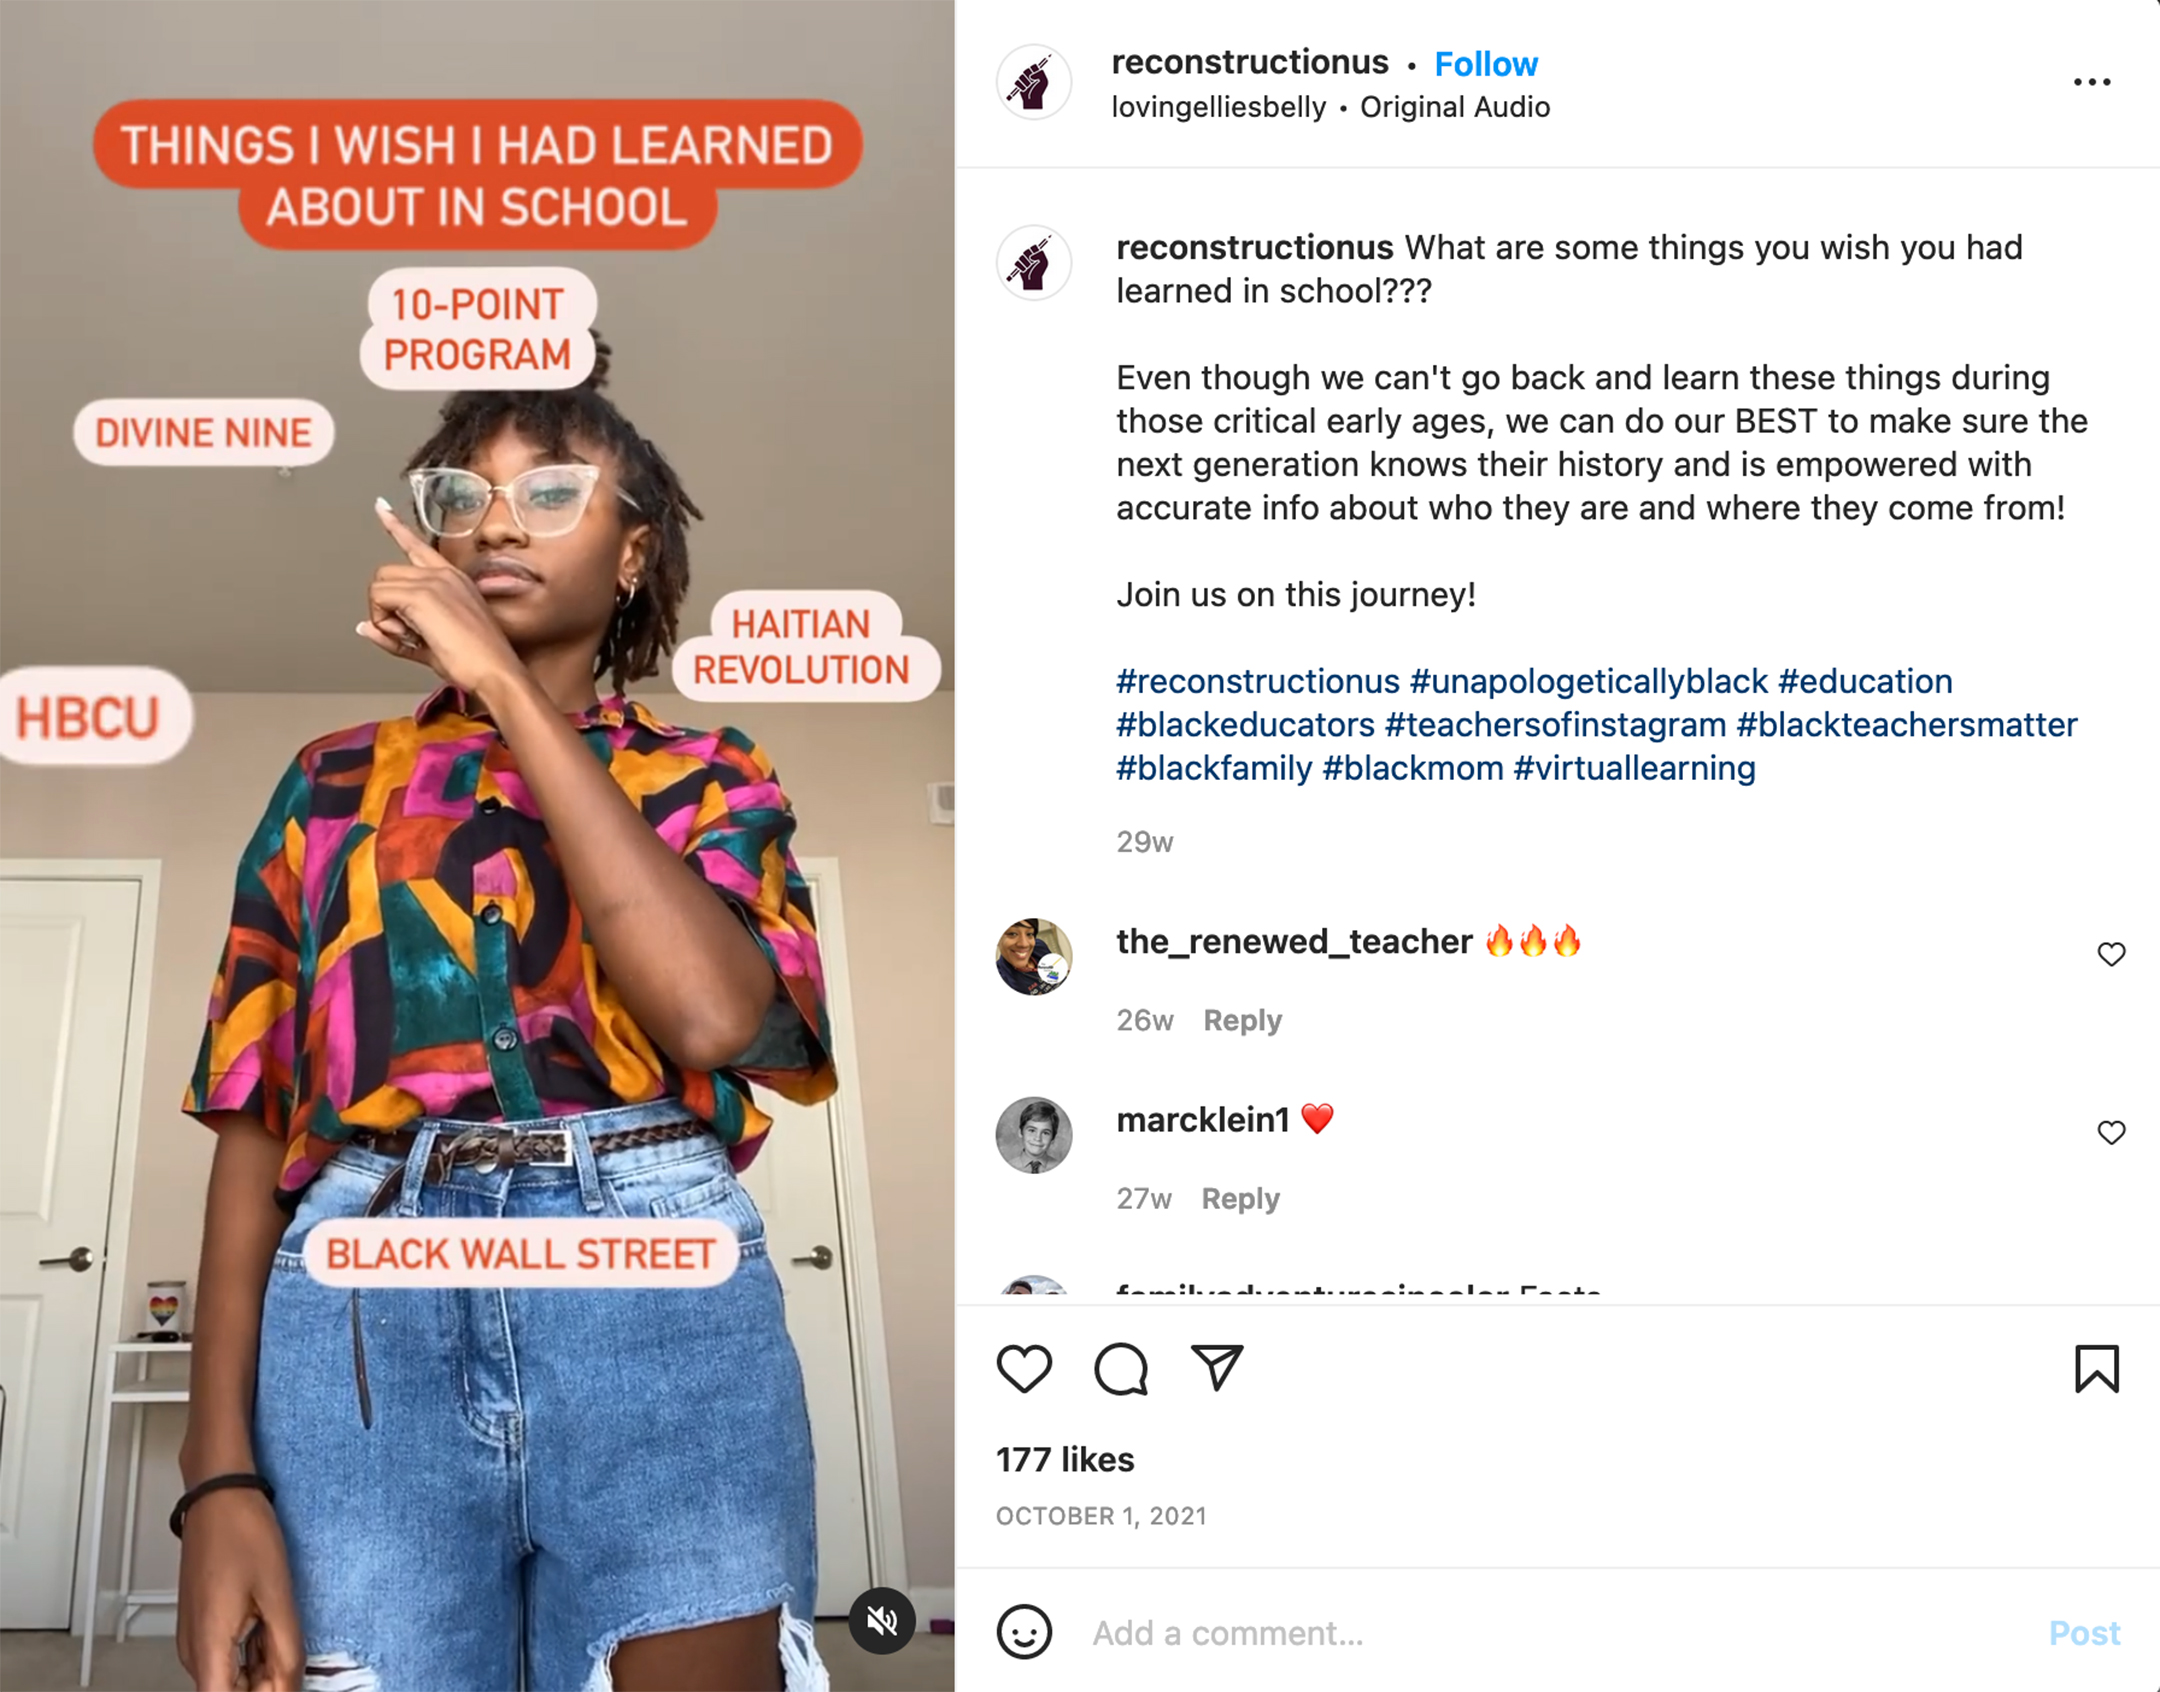 Instagram screenshot of a young Black woman pointing at words on the screen, under the heading Things I Wish I Had Learned About in School, including: 10-Point Program, Divine Nine, HBCU, Black Wall Street, and Haitian Revolution